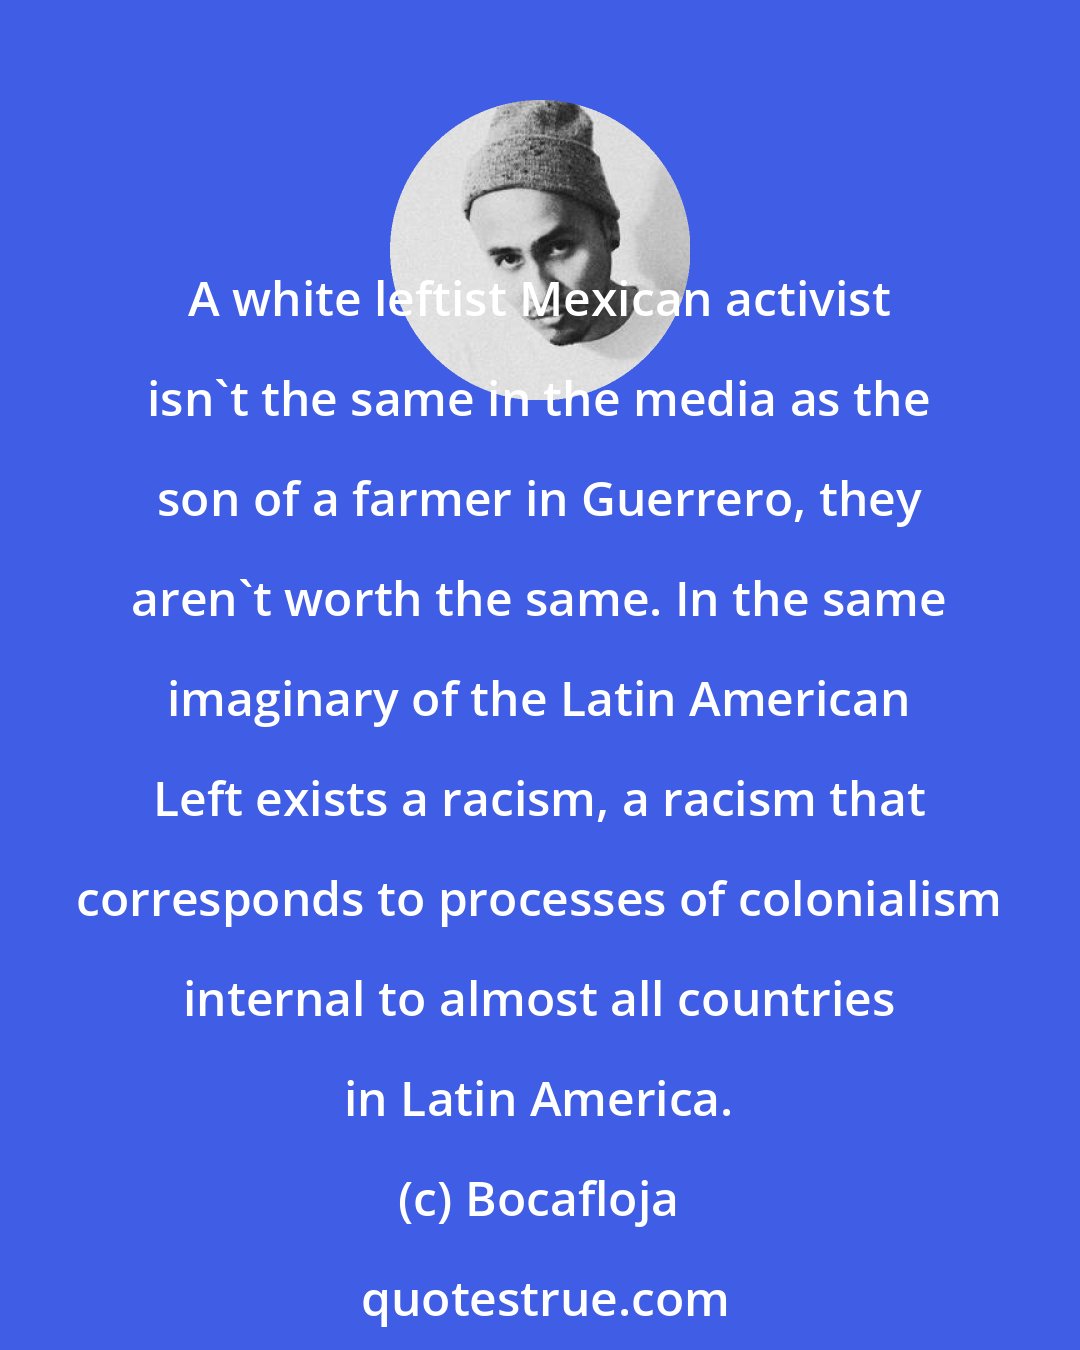 Bocafloja: A white leftist Mexican activist isn't the same in the media as the son of a farmer in Guerrero, they aren't worth the same. In the same imaginary of the Latin American Left exists a racism, a racism that corresponds to processes of colonialism internal to almost all countries in Latin America.